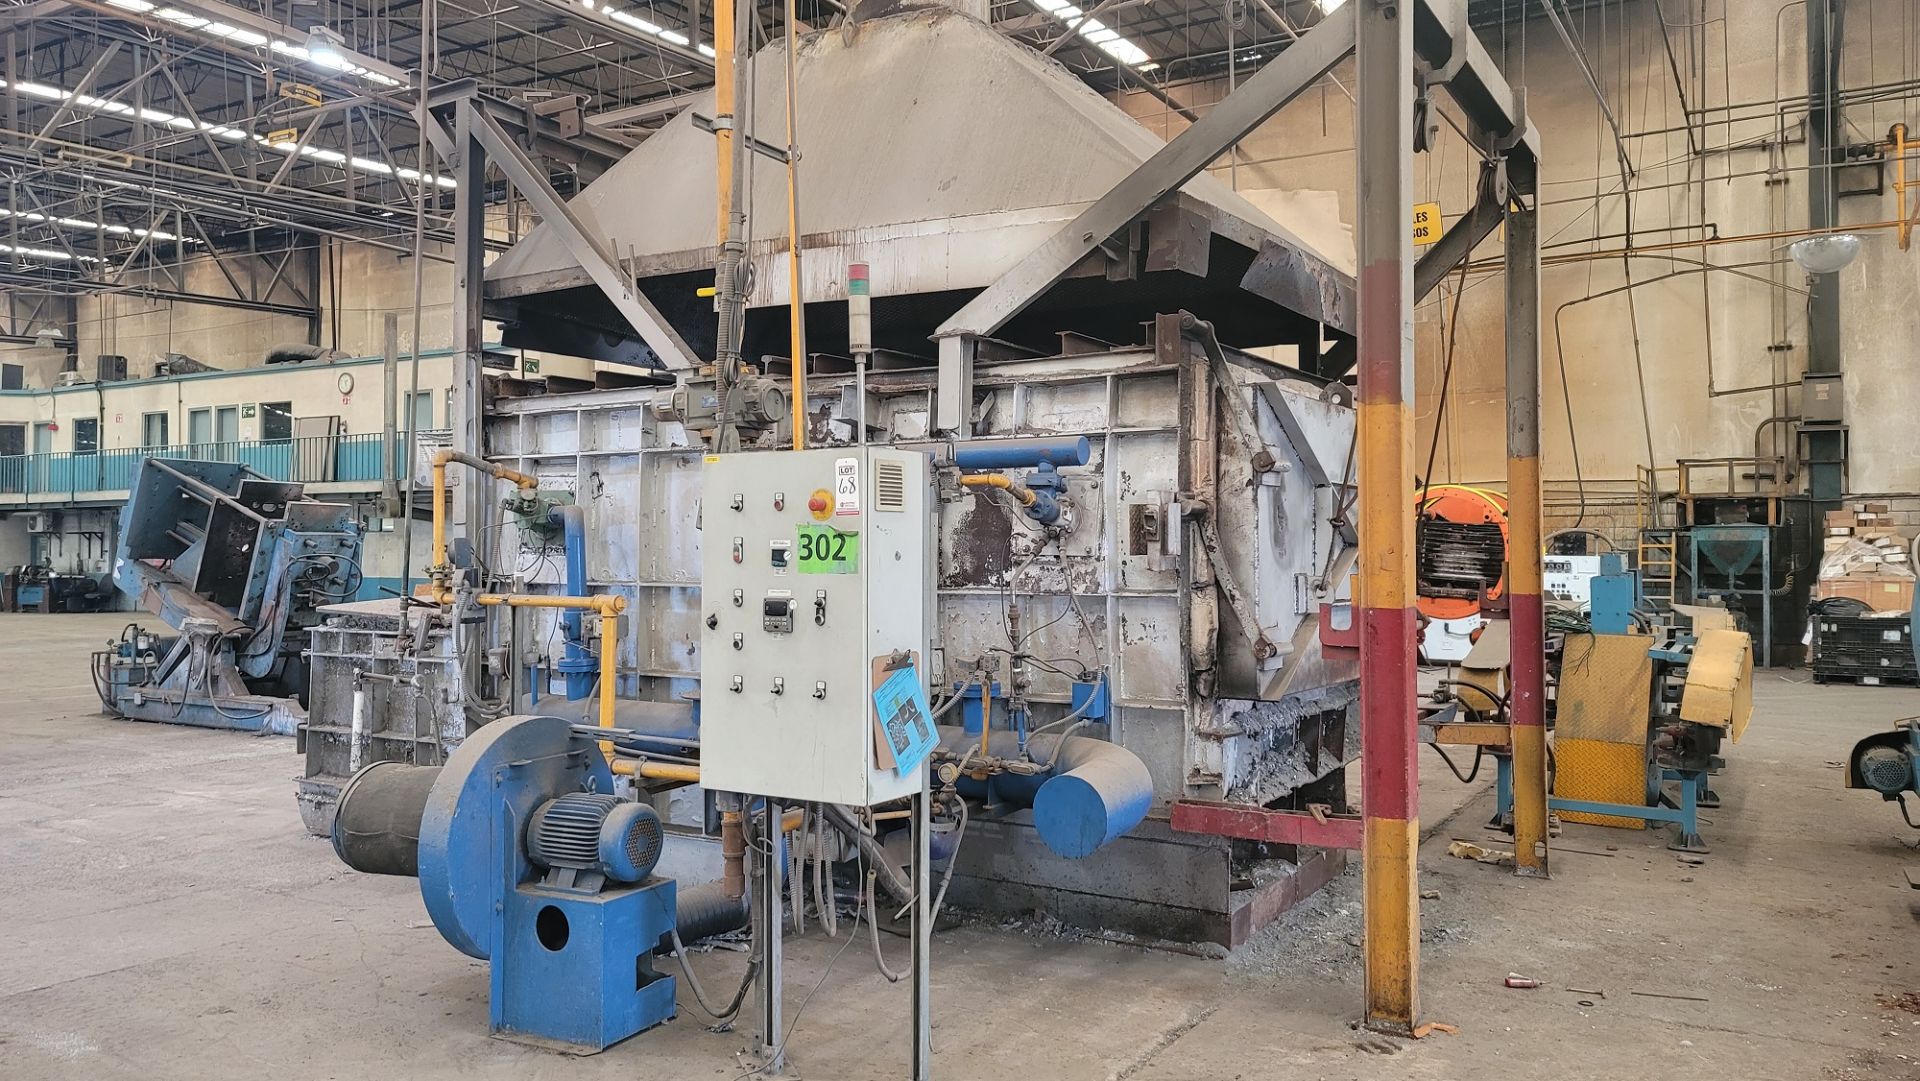 REVERB FURNACE W/ 3 BURNERS 1MMBTU EA (COMBUSTION SYSTEM, VALVE TRAIN AND CONTROL ONLY), 15,000 LB